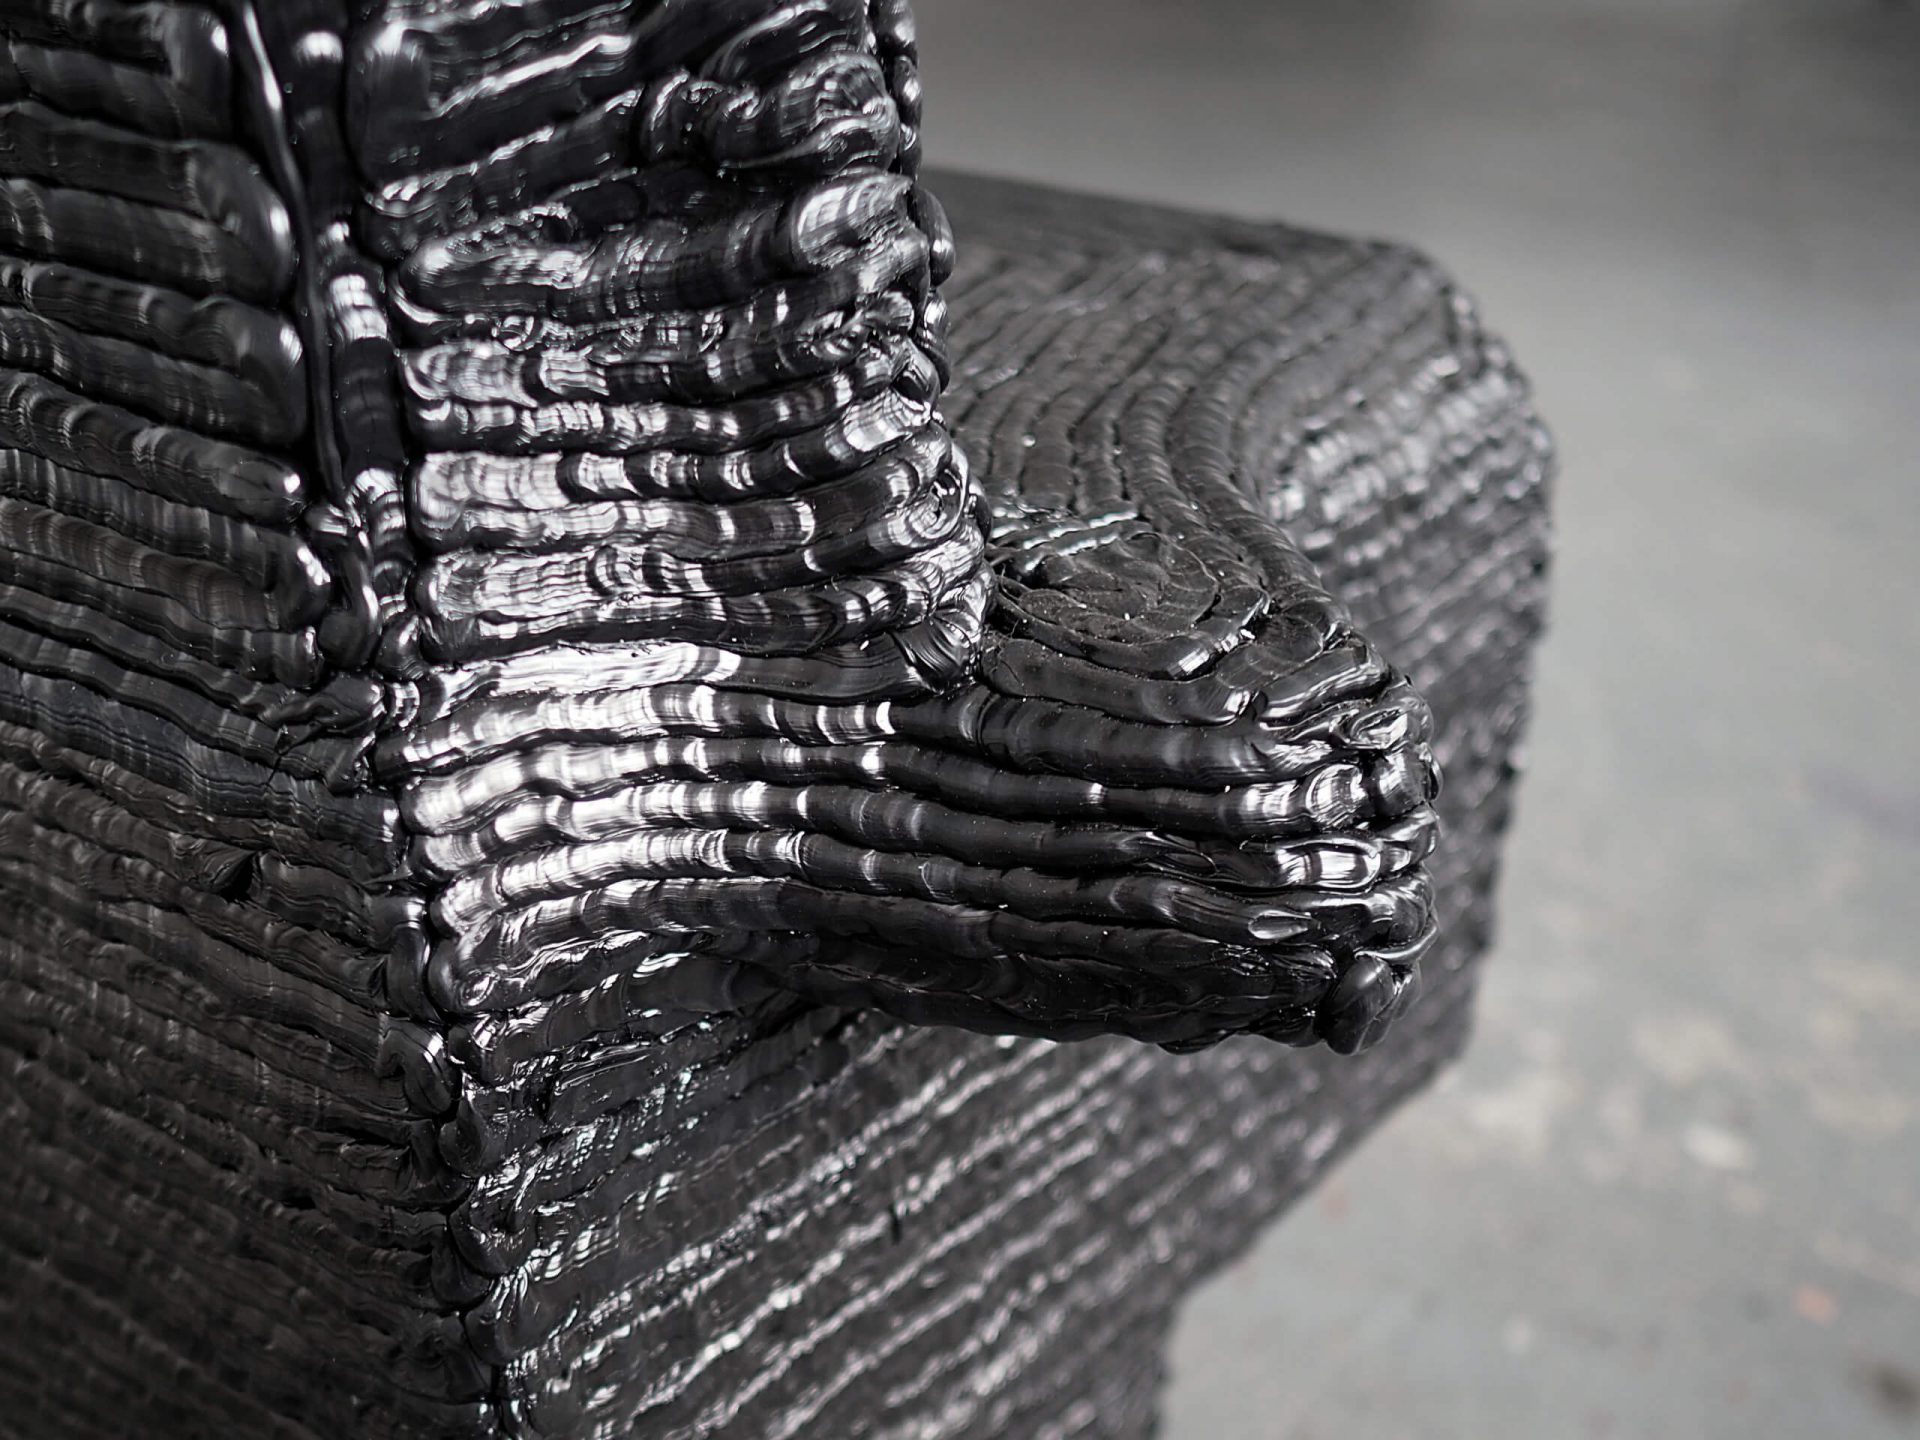 Caulk Chairs are designed intuitively